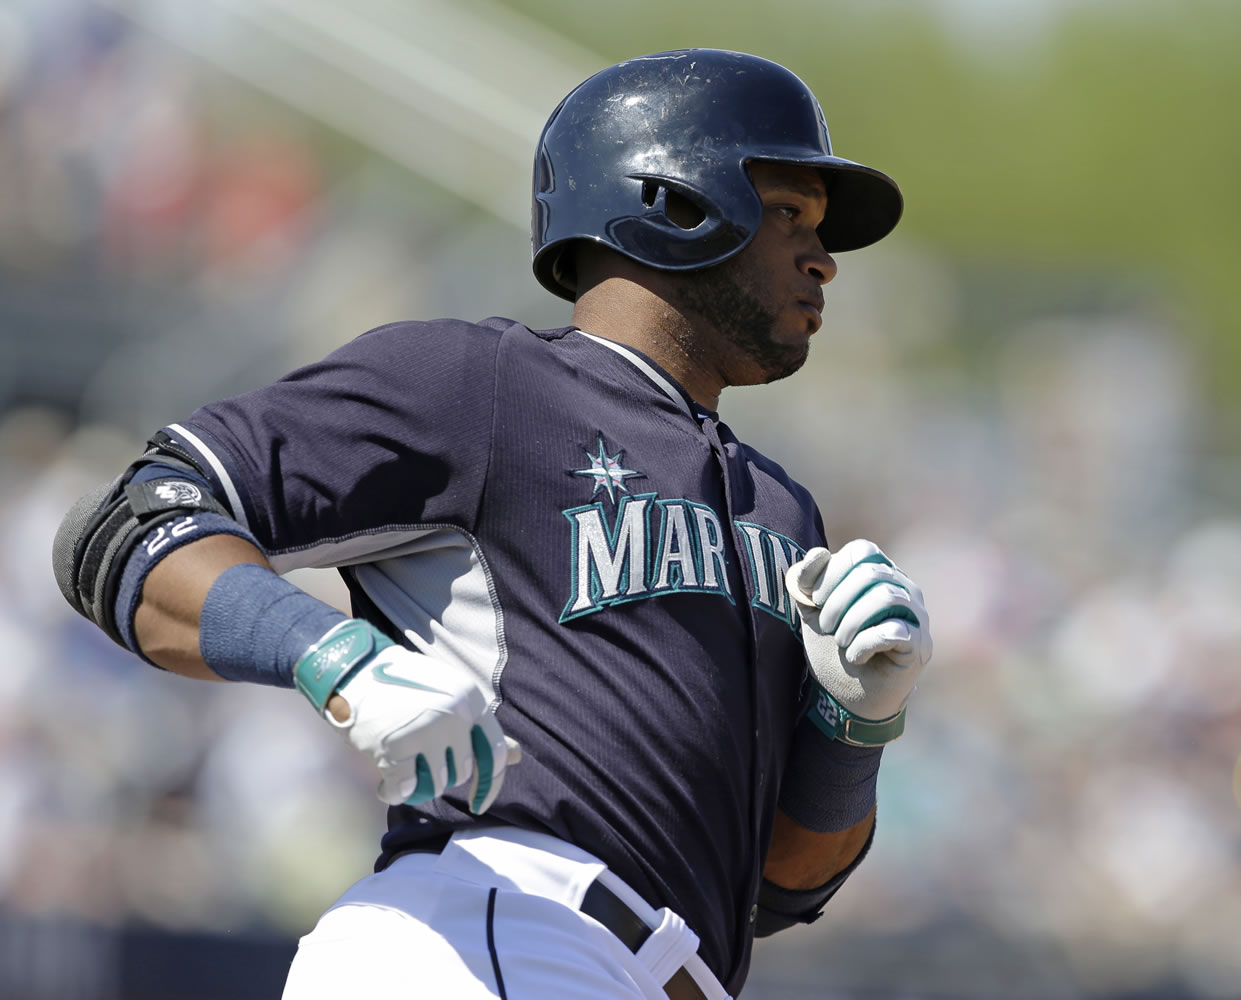 Will Robinson Cano bring stable offensive production that the Mariners have so desperately lacked?